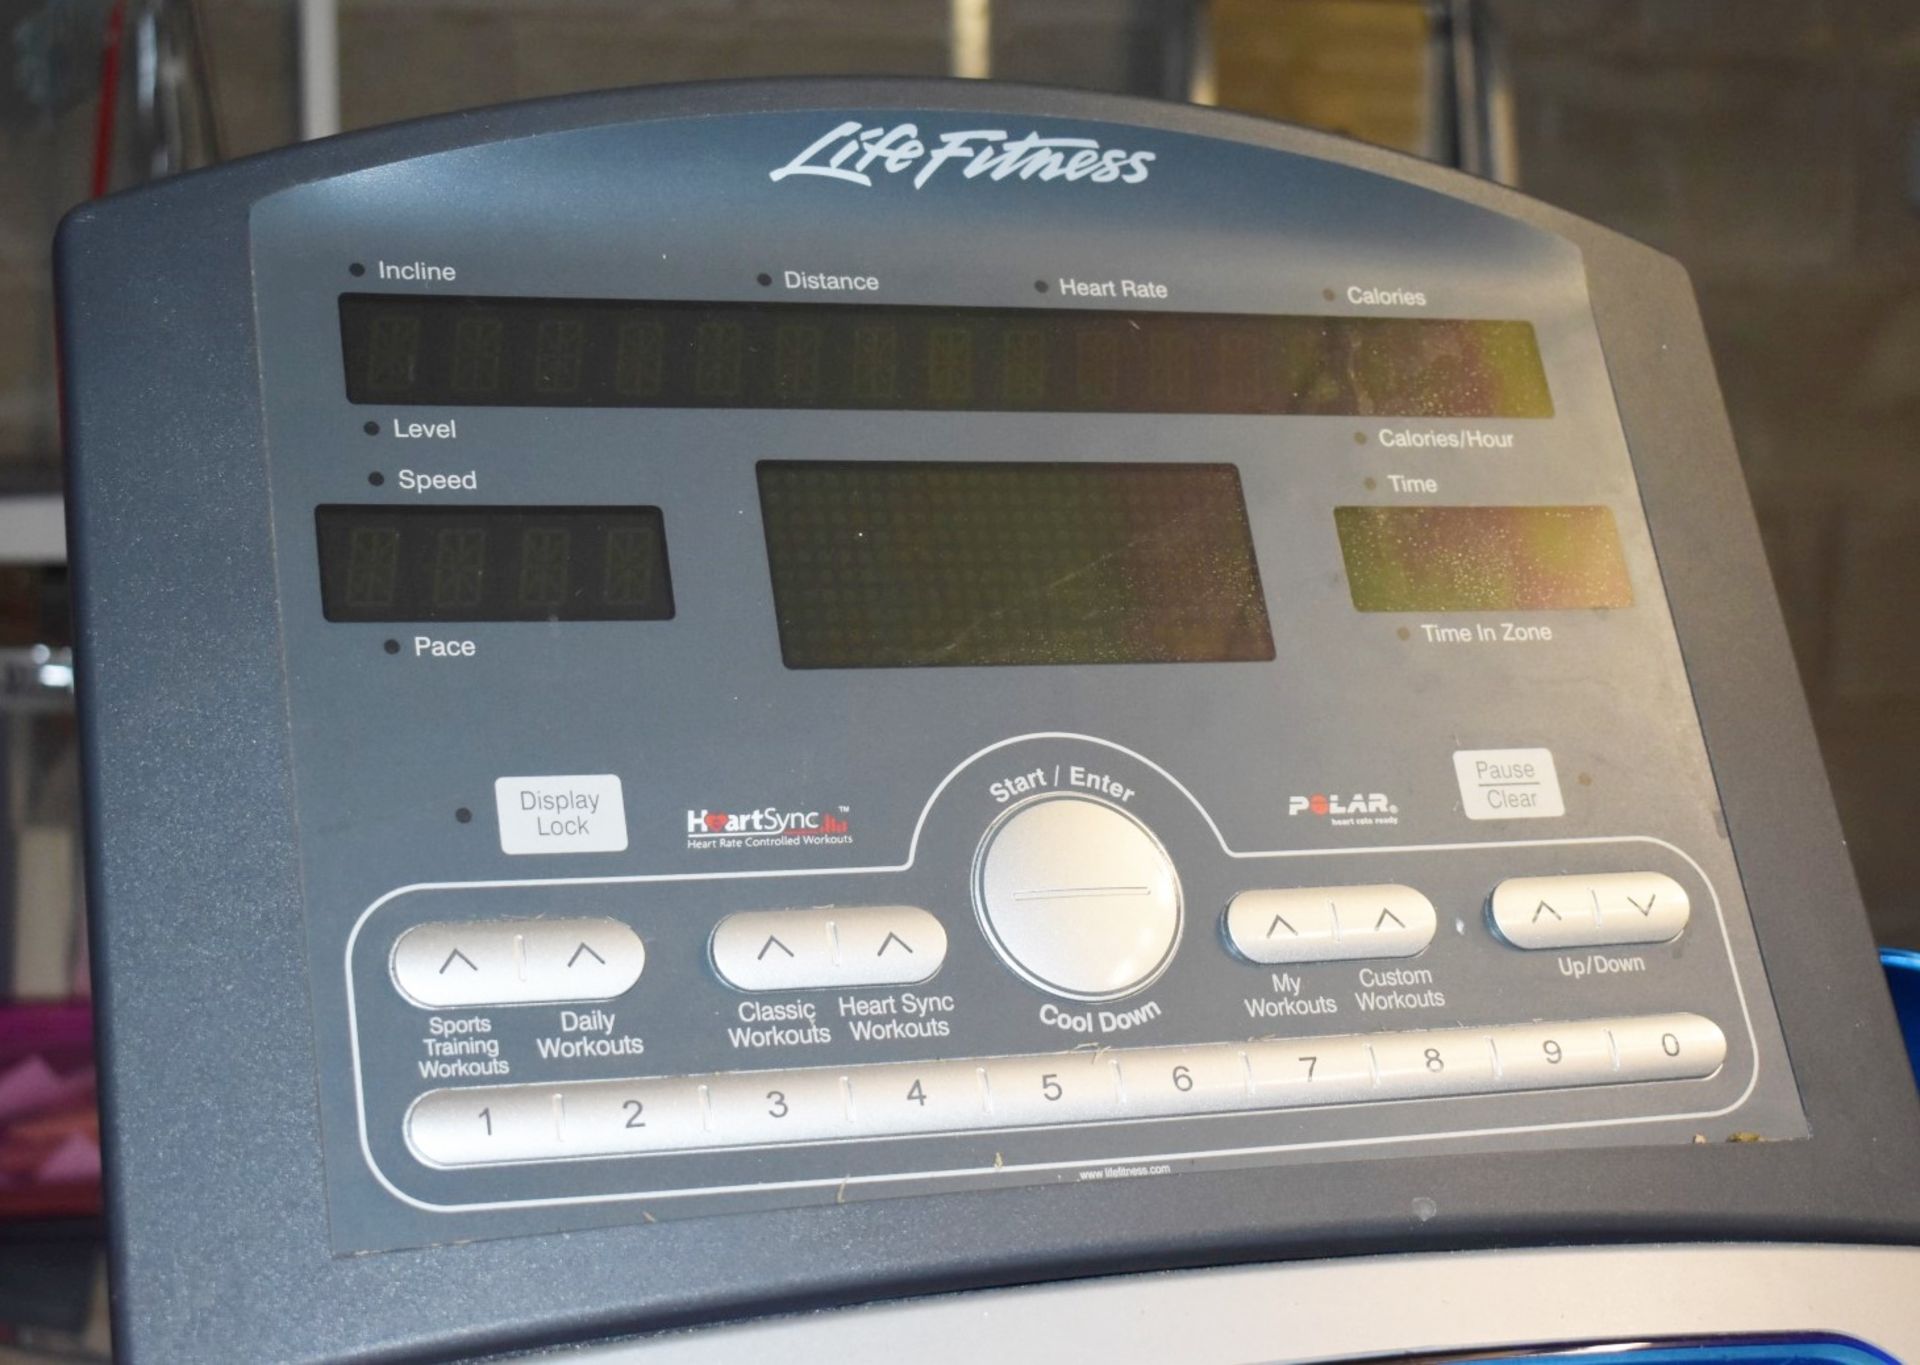 1 x Life Fitness T7-0 Club Style Fitness Treadmill - RRP £3,600 - CL546 - Location: Hale, Cheshire - - Image 9 of 10